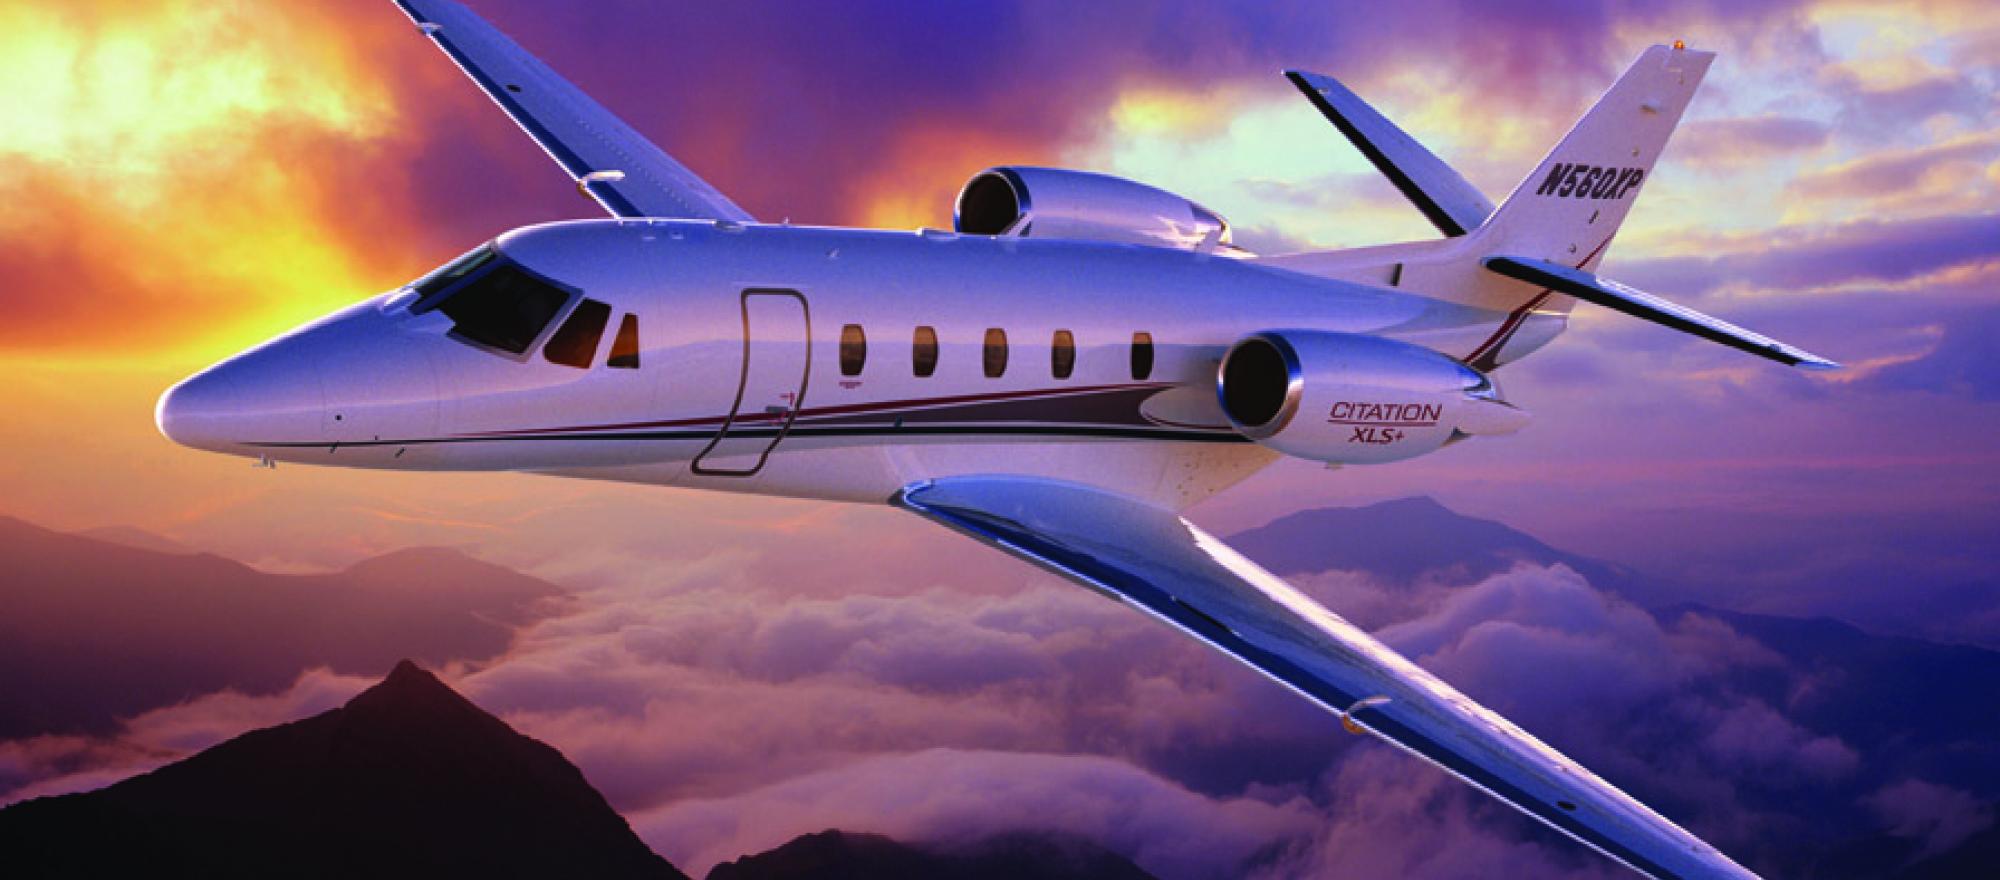 Preowned aircraft annual report